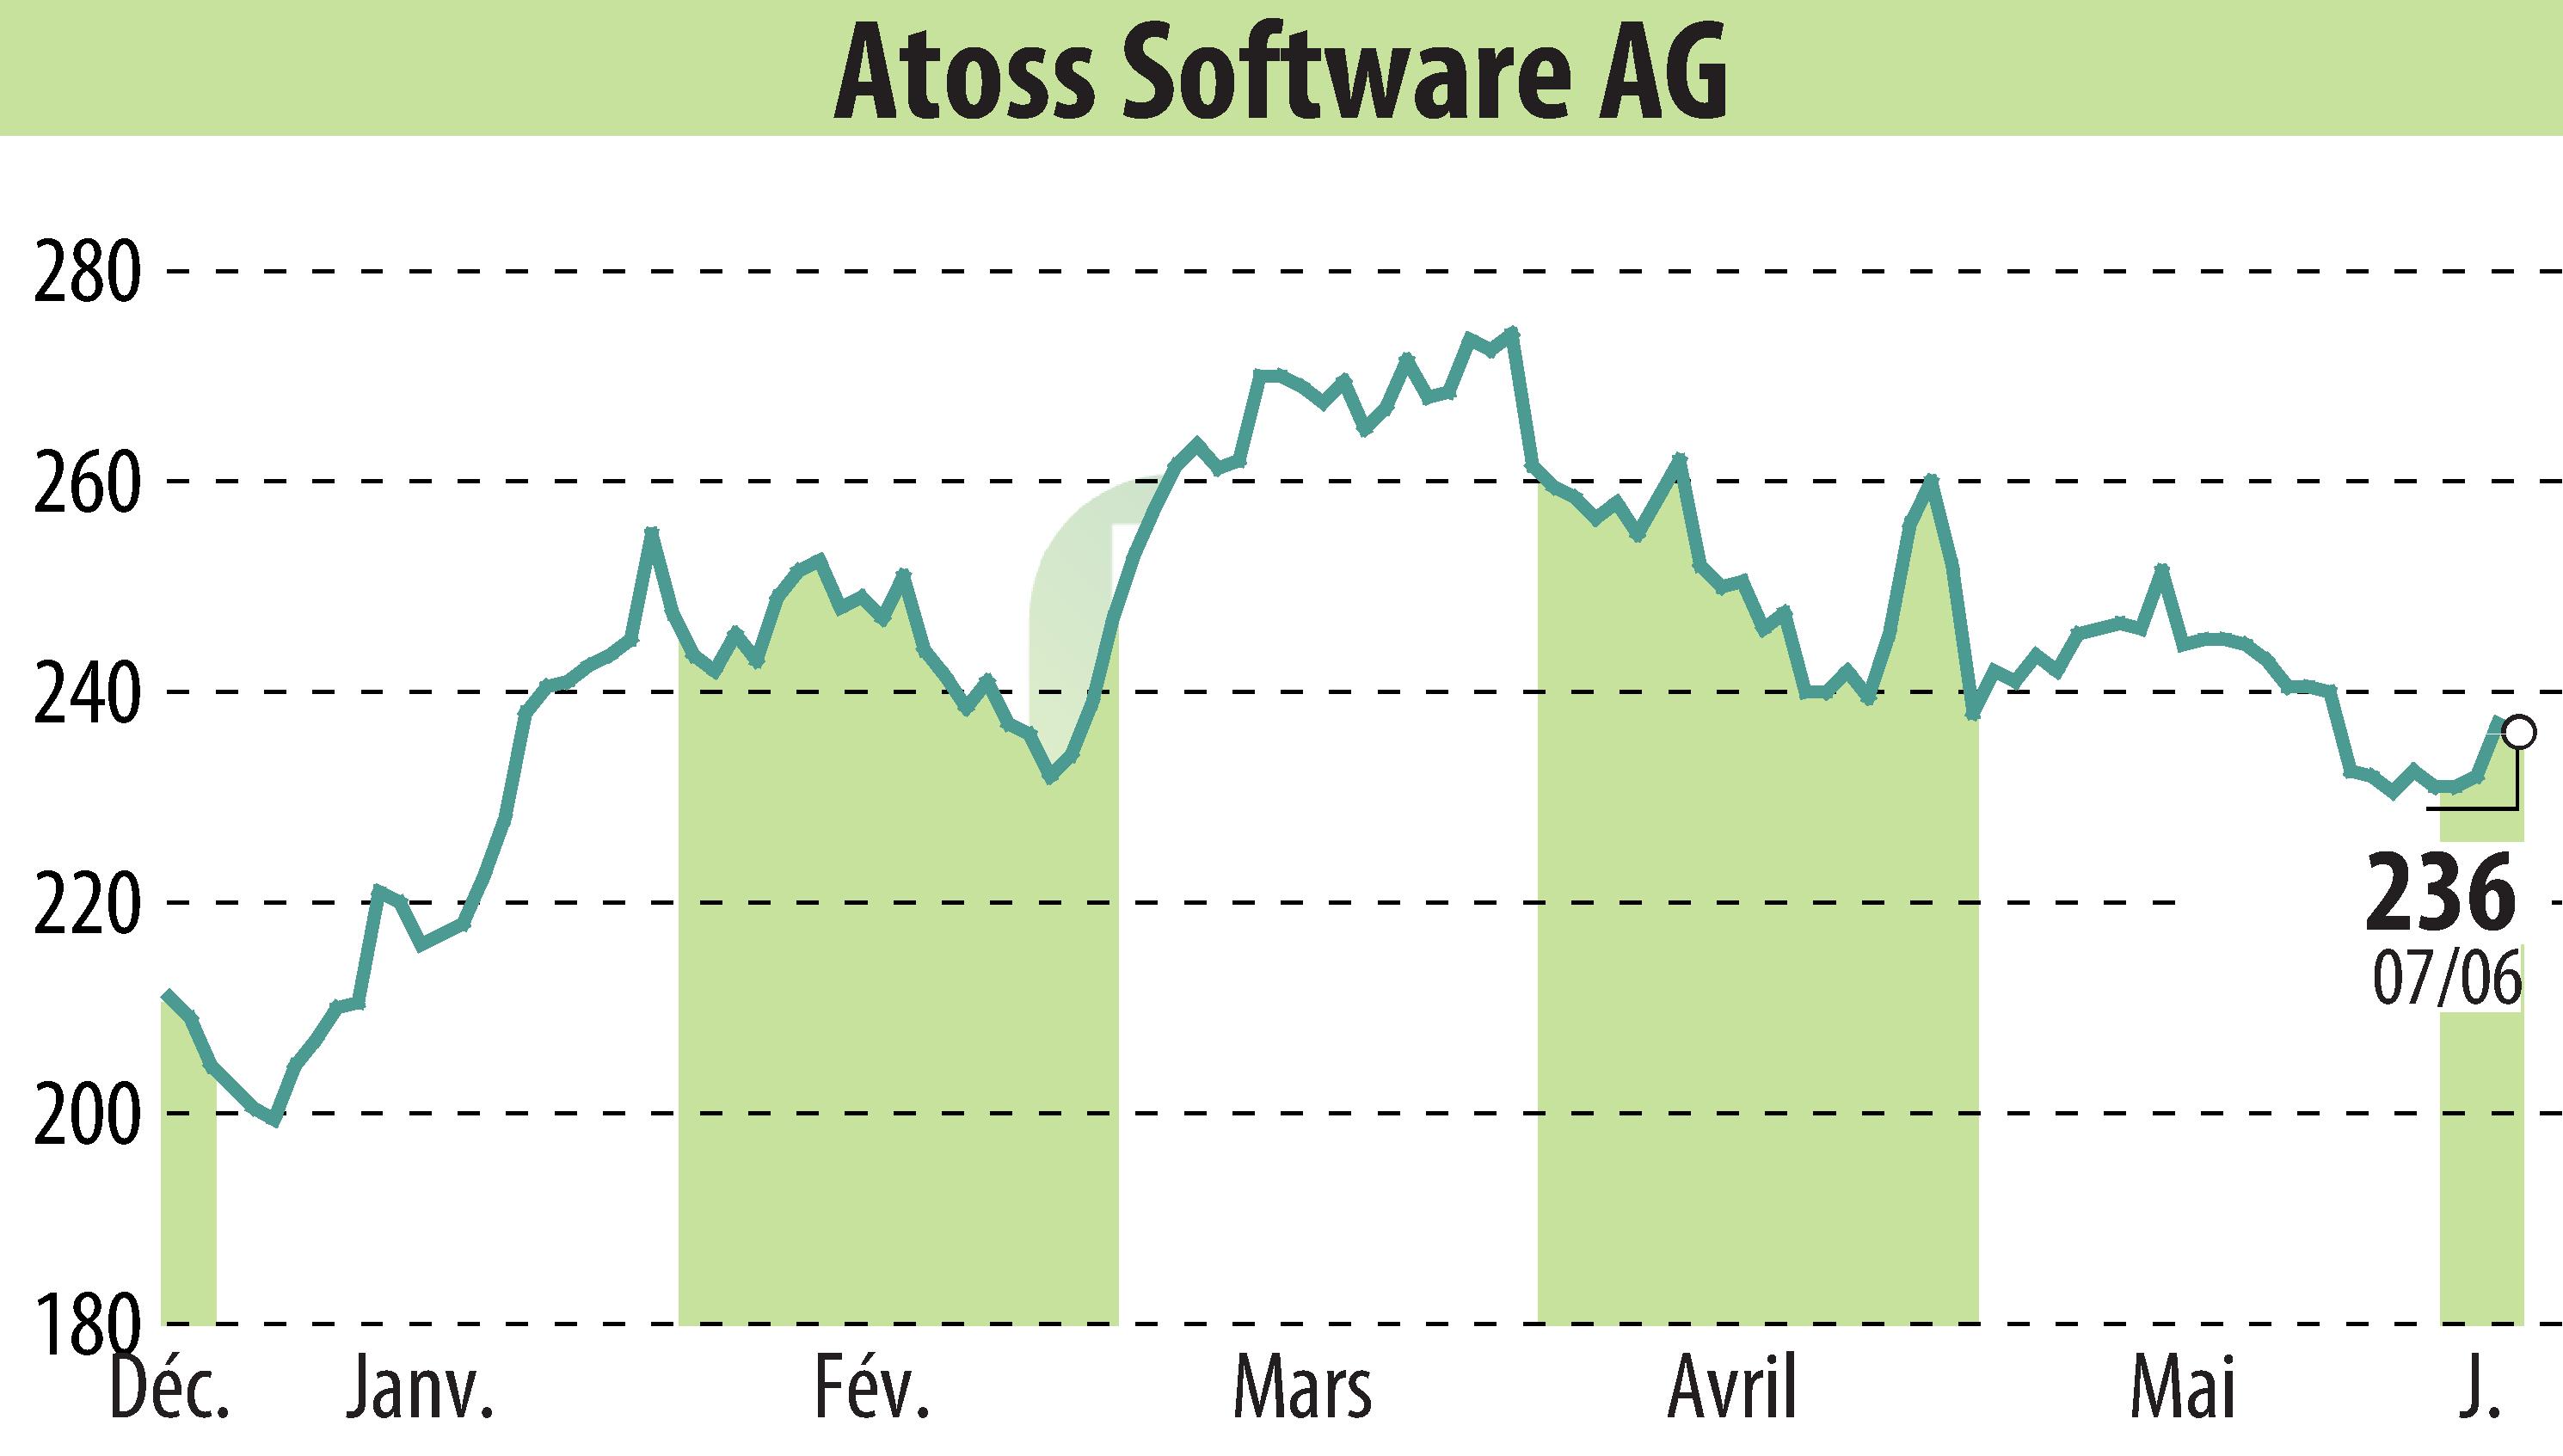 Stock price chart of ATOSS Software AG (EBR:AOF) showing fluctuations.